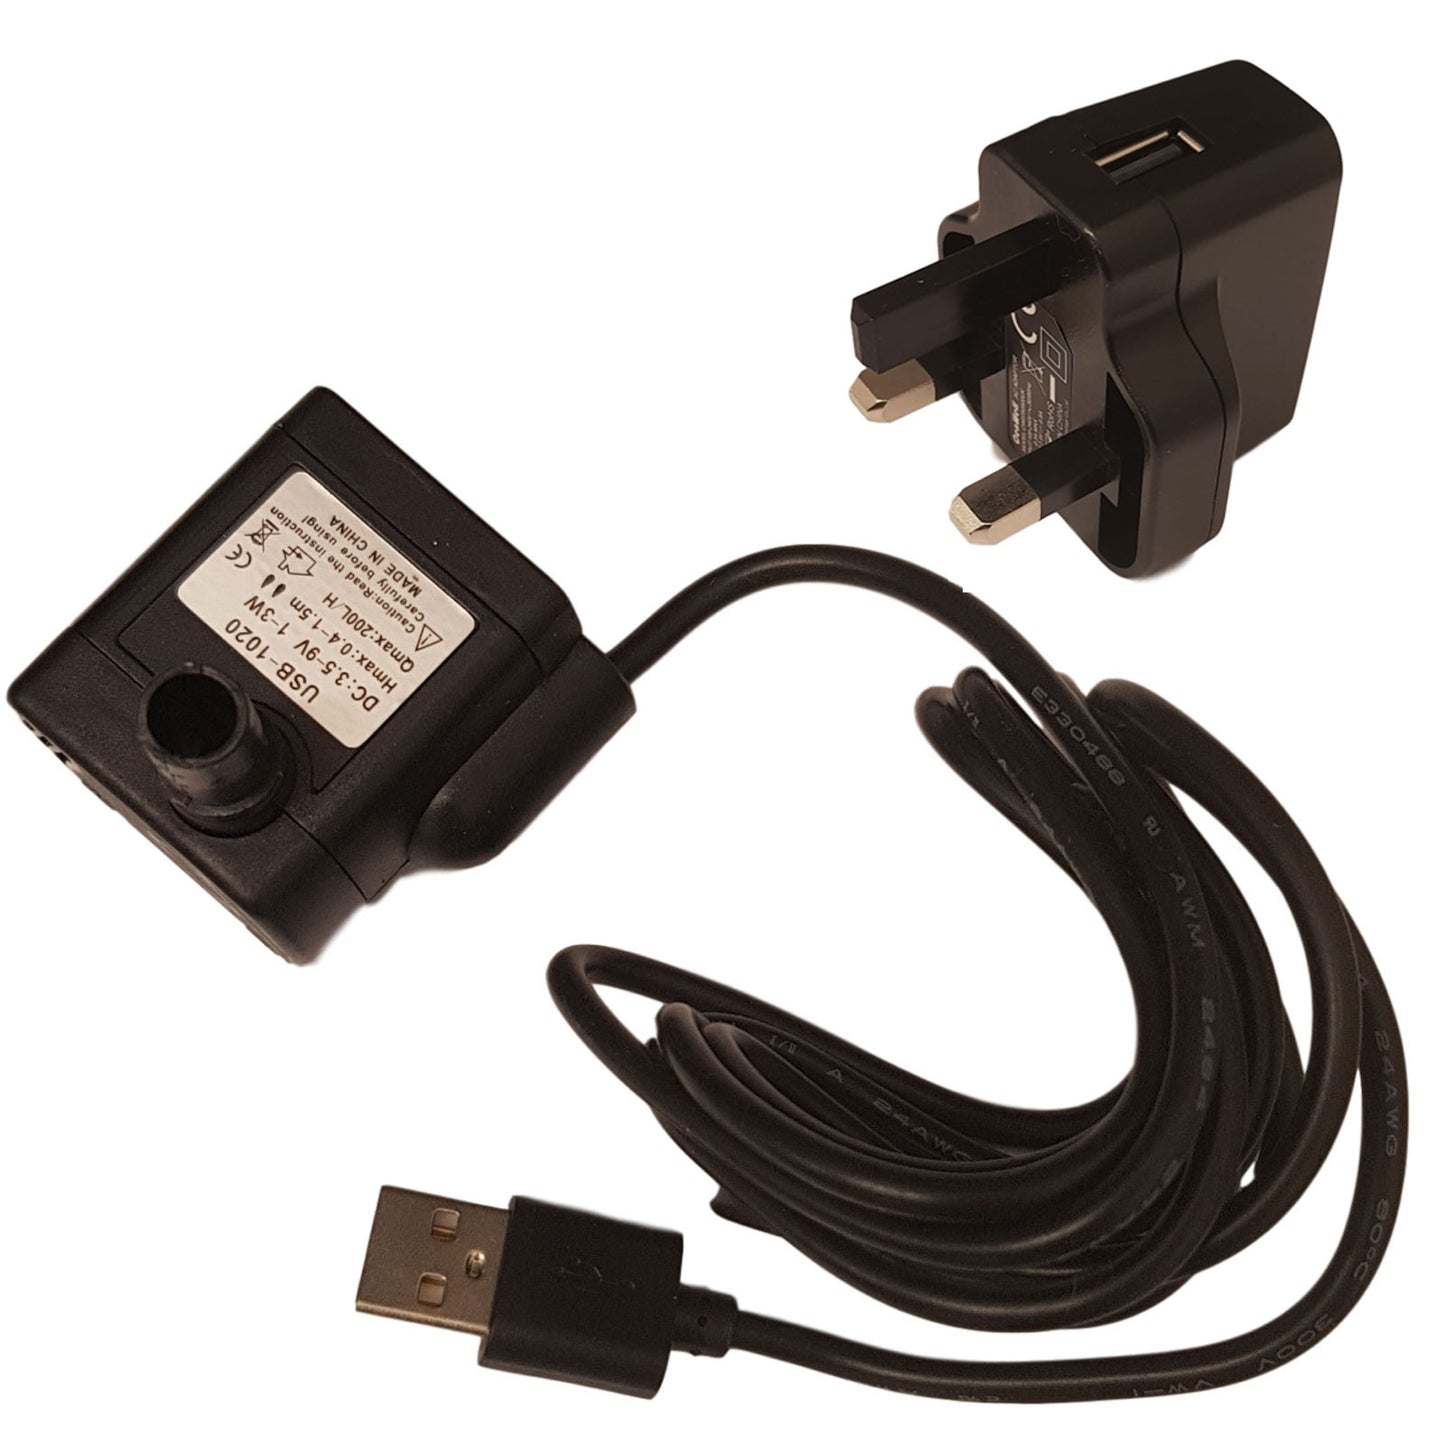 Replacement Pump & Transformer for Catit Dogit Water Bowls - USB1020